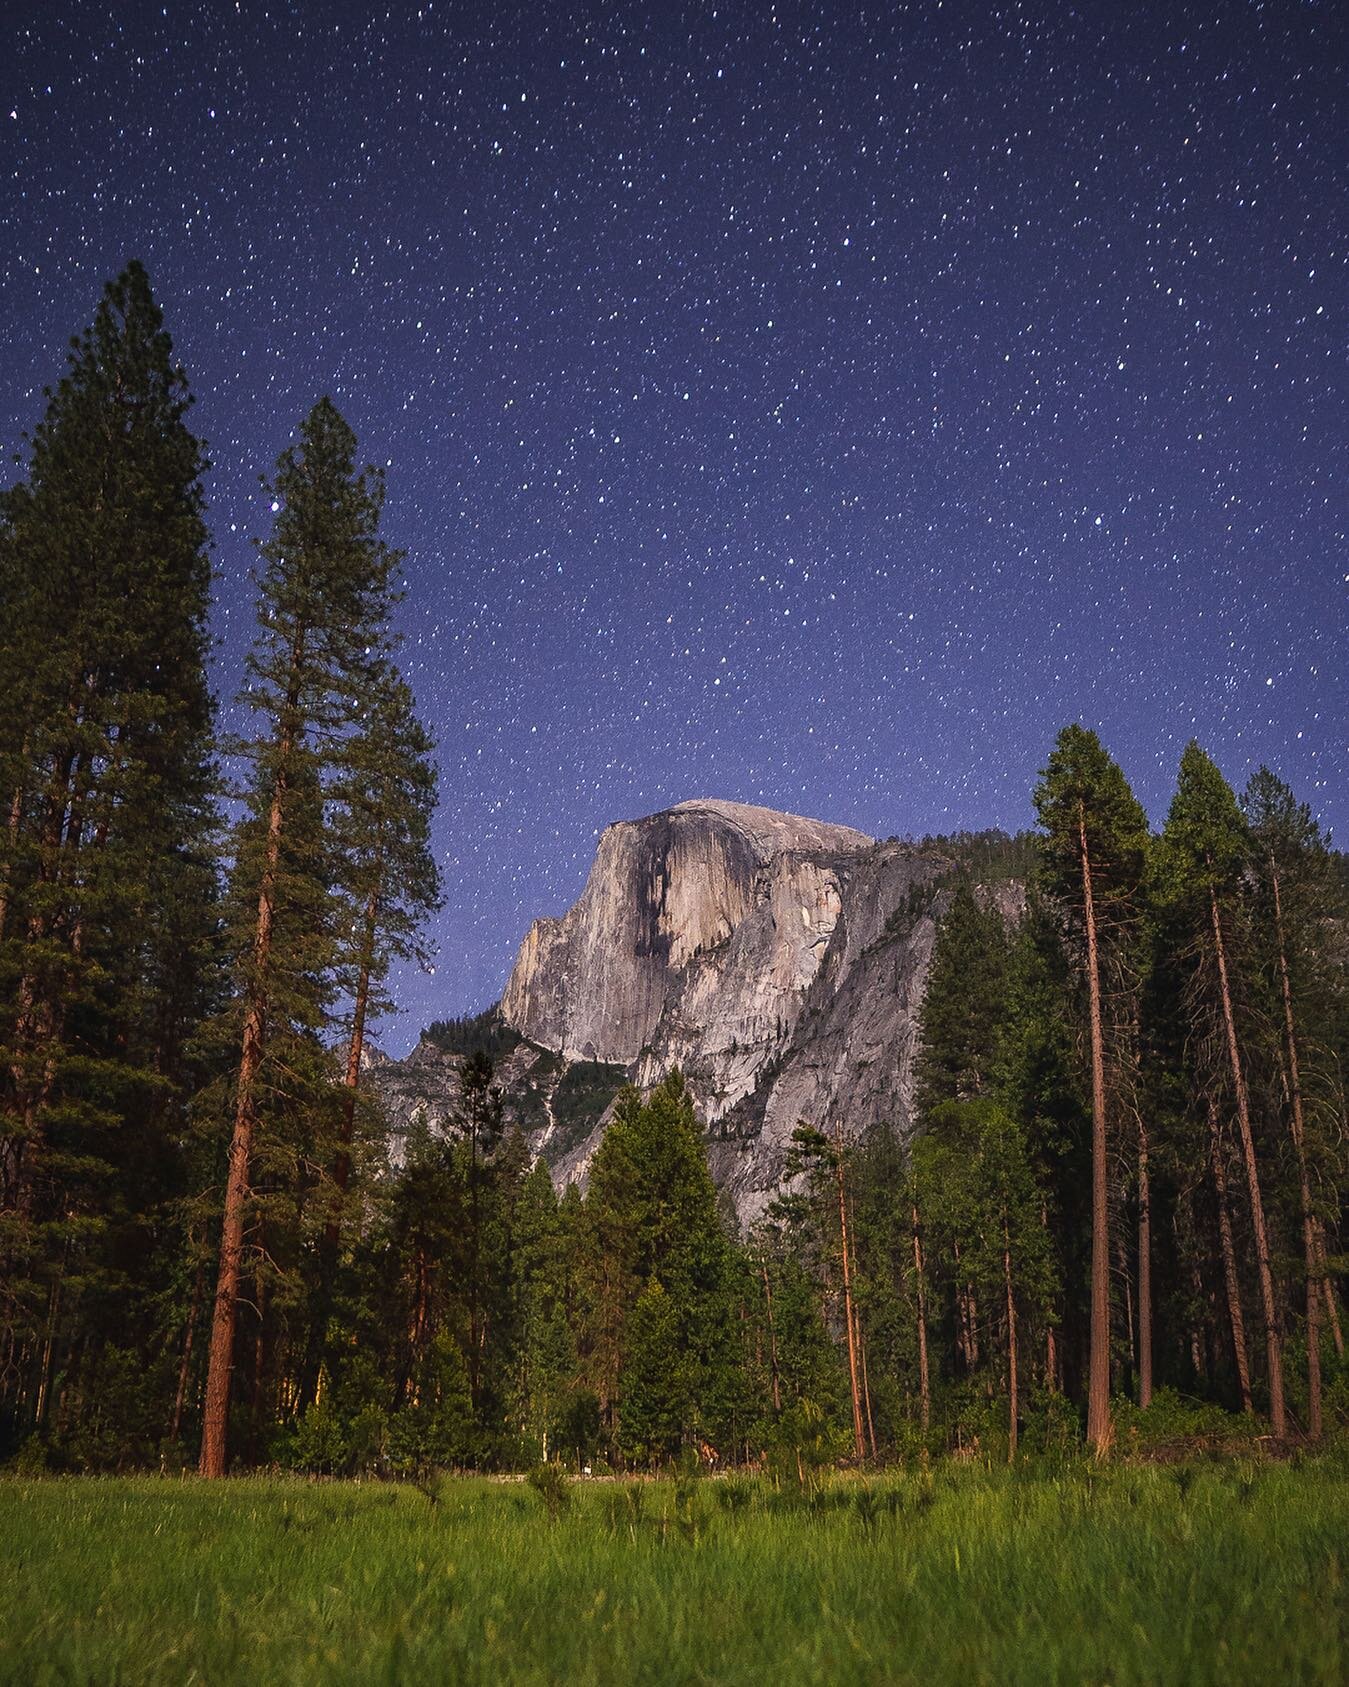 Had to get our Yosemite fix this year before their reservation system goes into effect! (after 5/31, you need a reservation to enter the park until September!) i took this shot sometime around midnight after the chaos of park visitors calmed, and whe